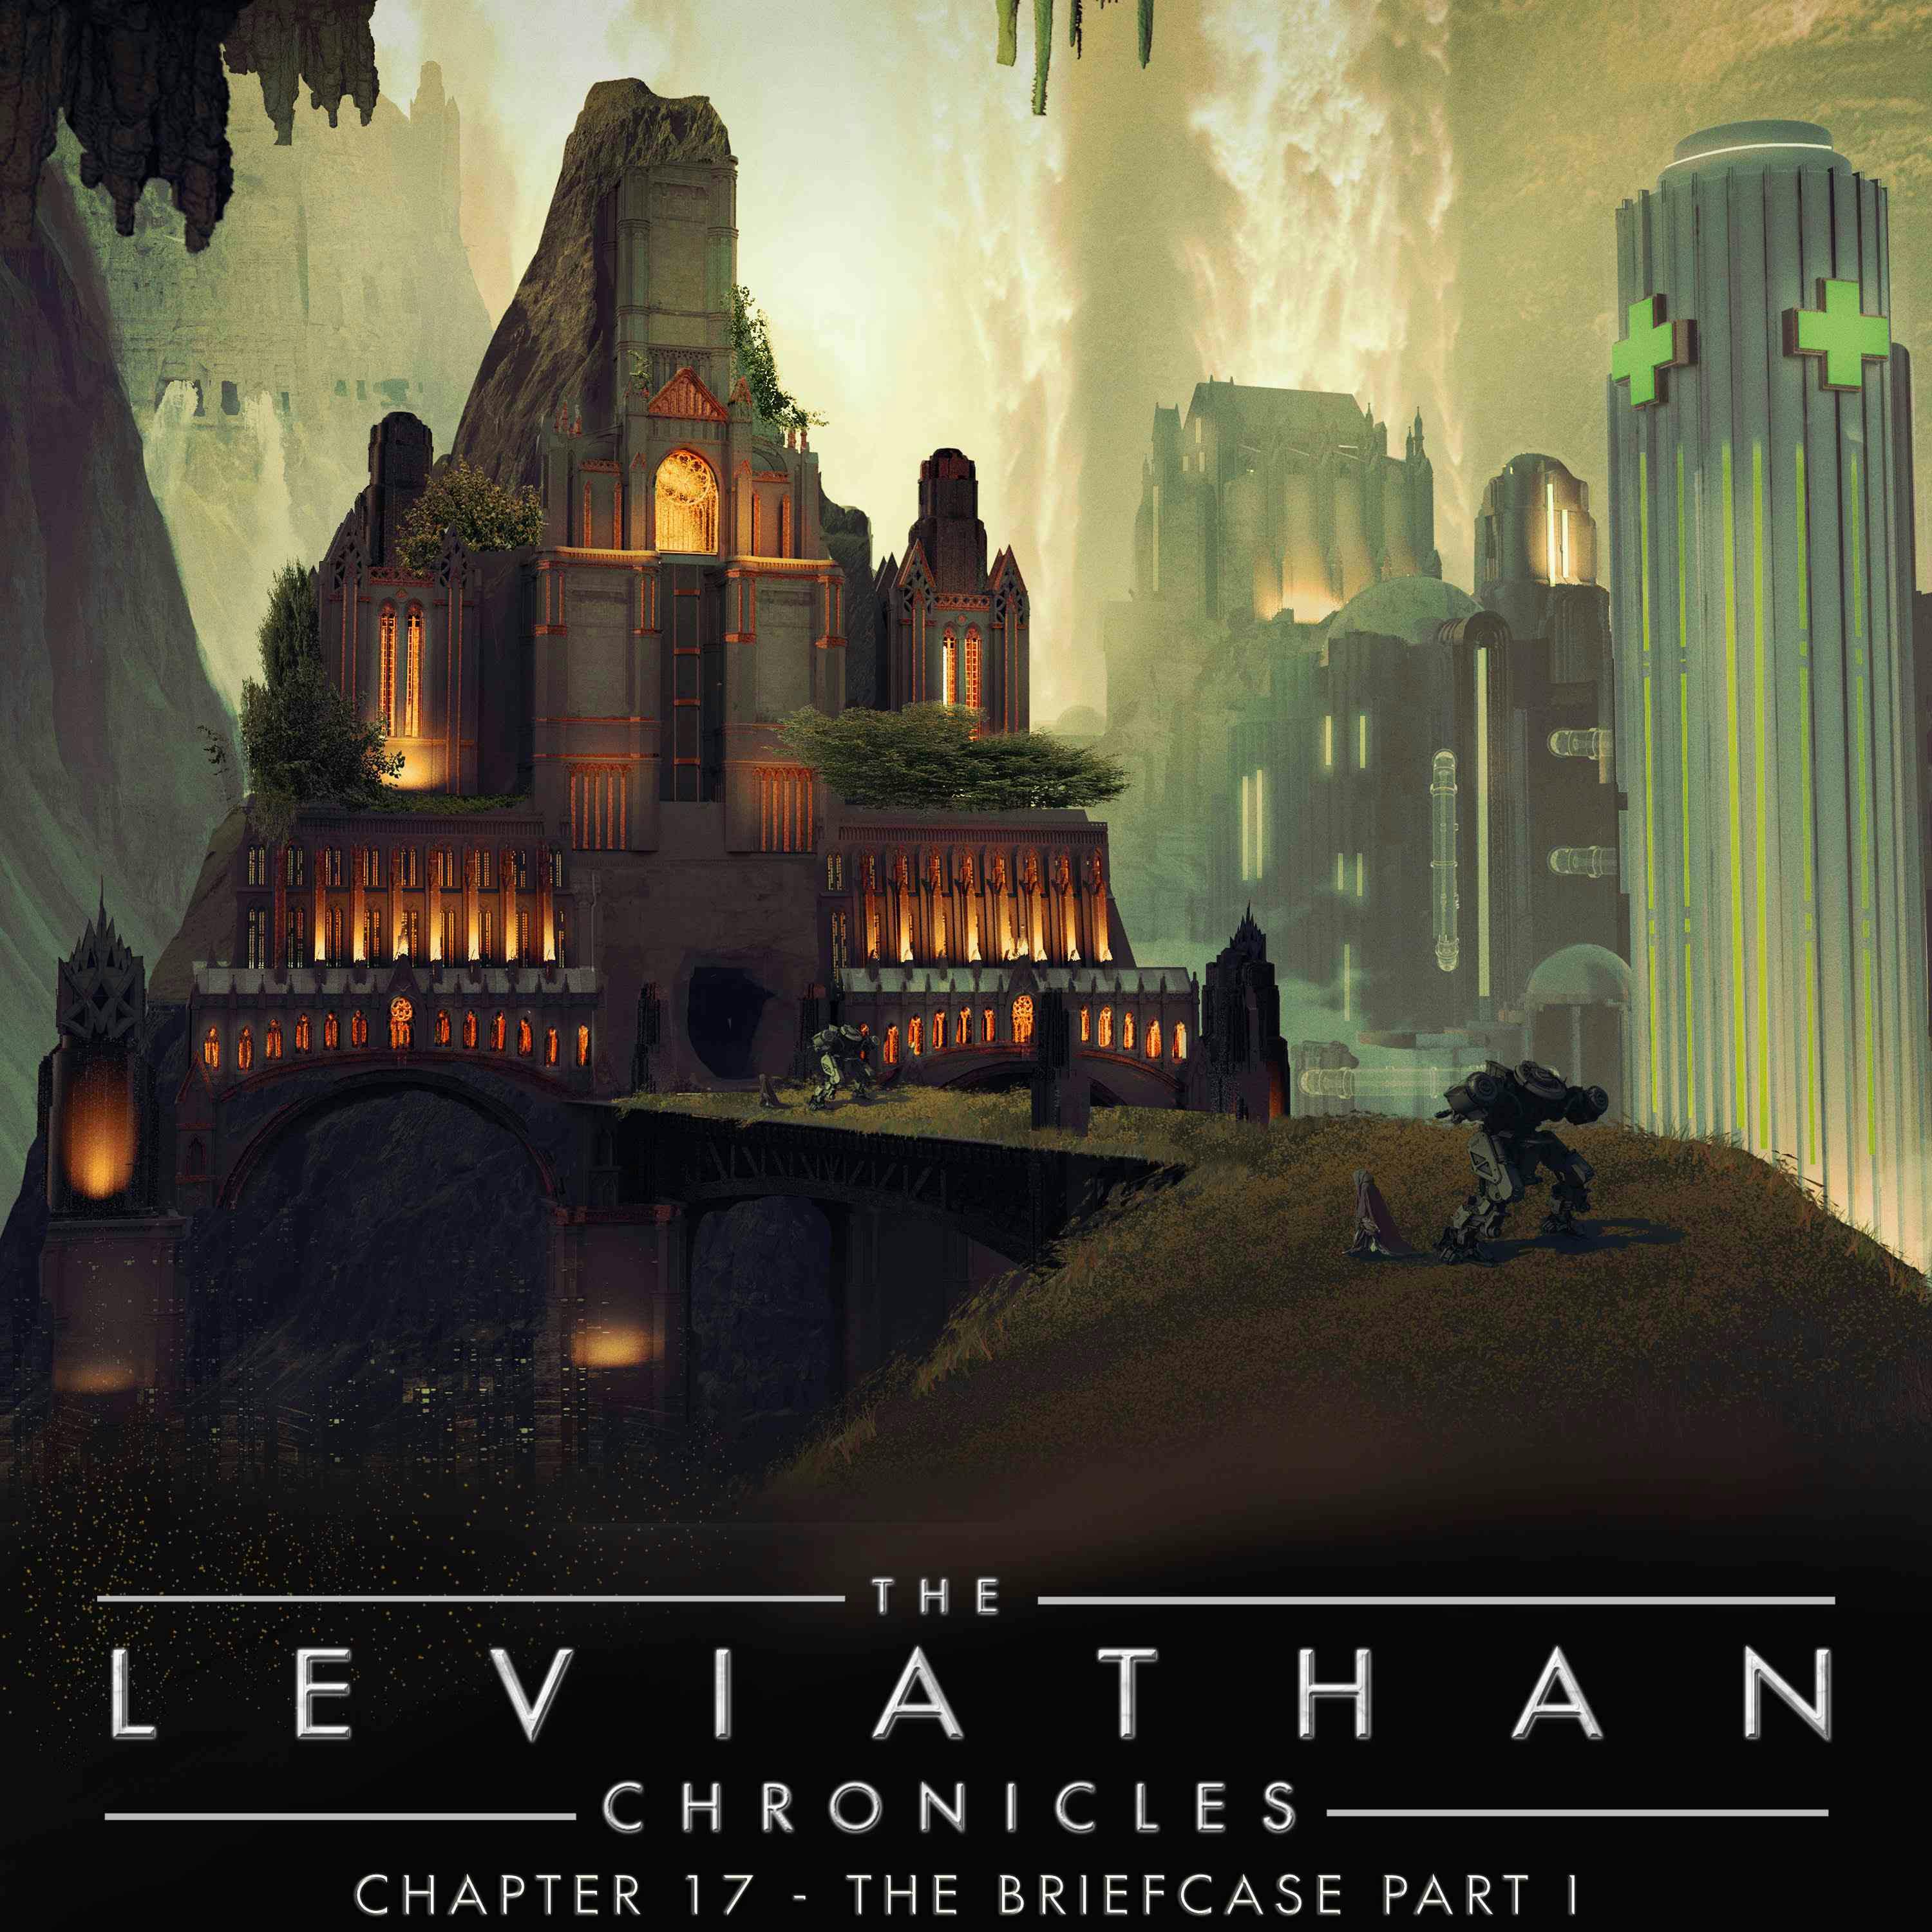 The Leviathan Chronicles | Chapter 17 - The Briefcase Part I